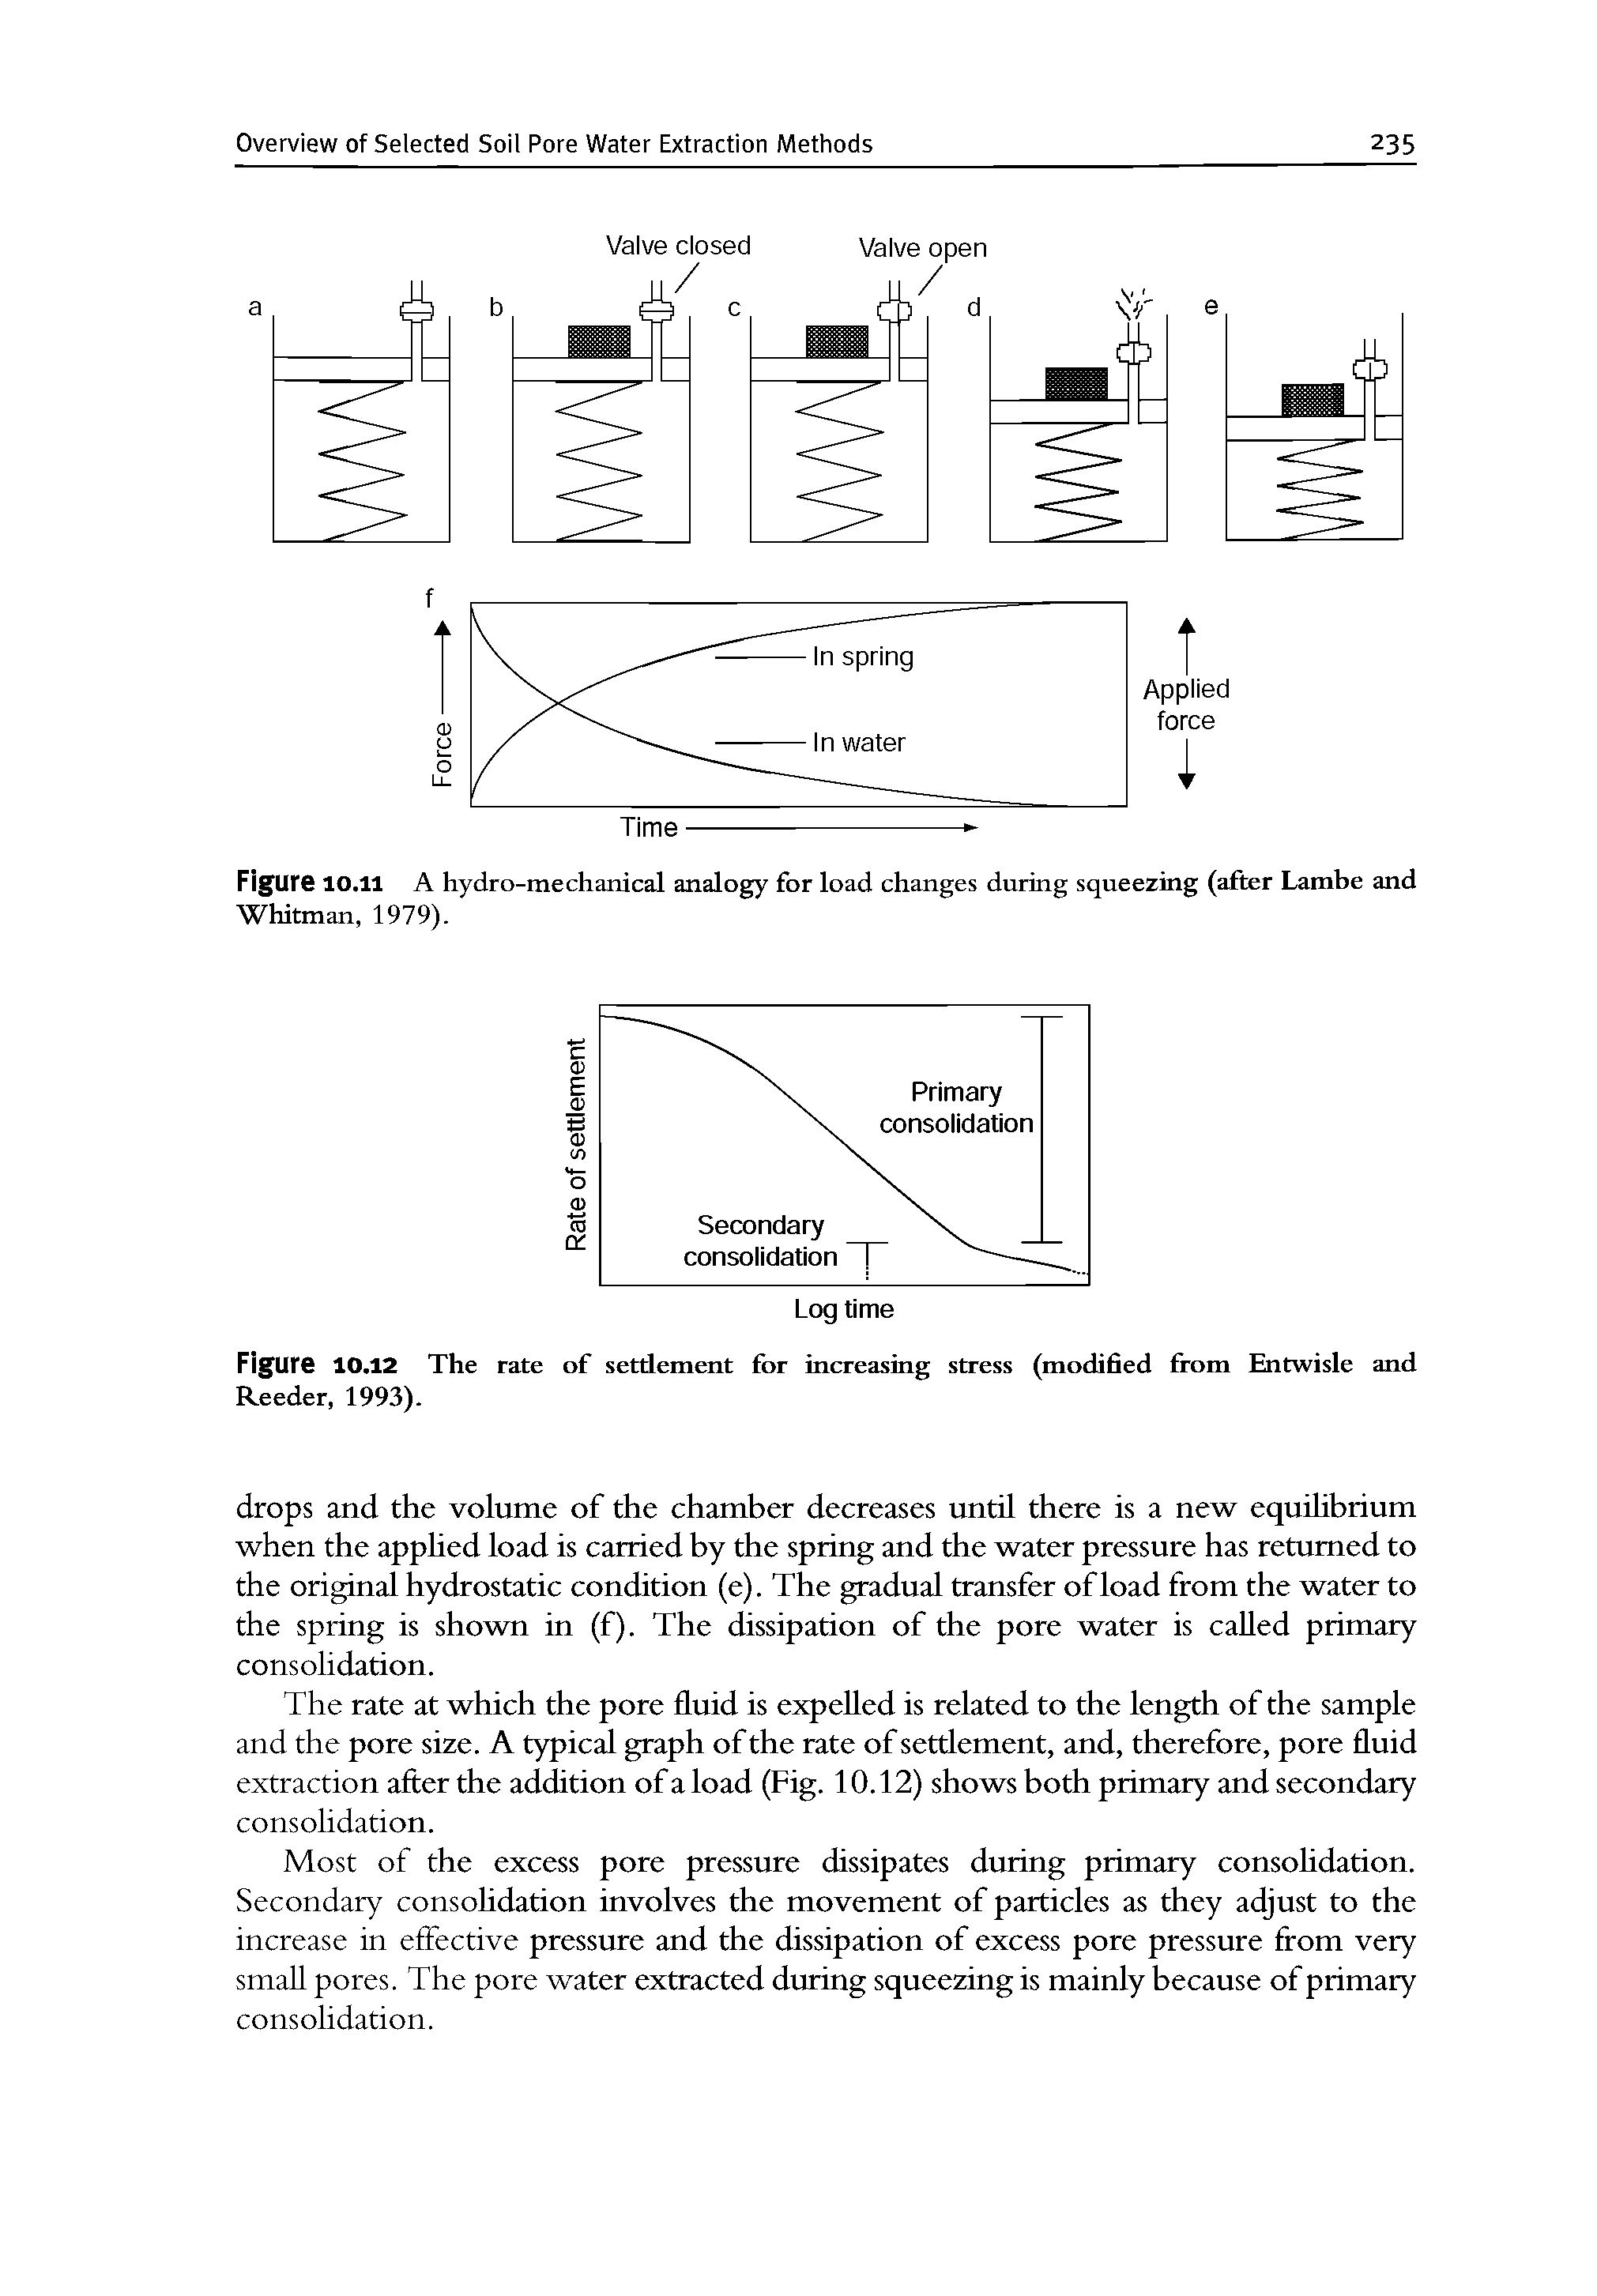 Figure 10.11 A hydro-mechanical analogy for load changes during squeezing (after Lambe and Whitman, 1979).